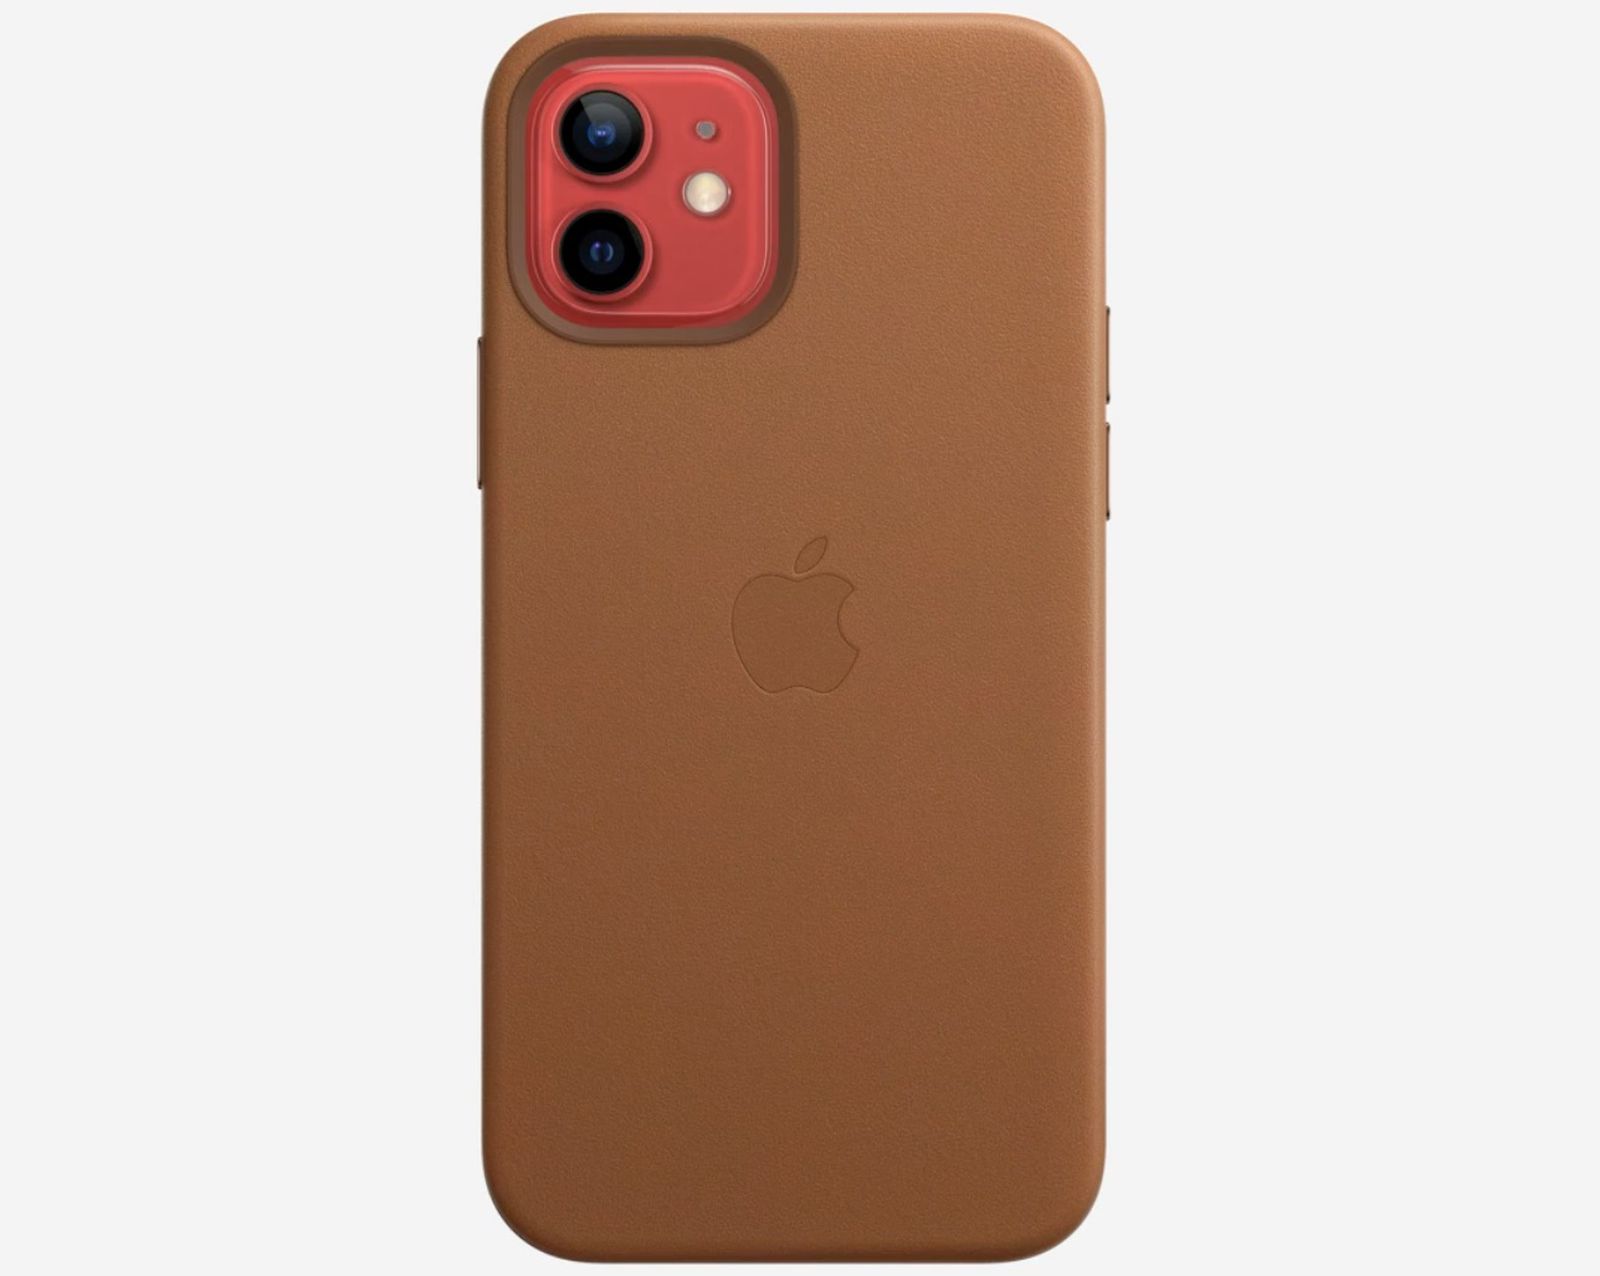 Leather Cases For Iphone 12 And 12 Pro Coming On November 6 Macrumors